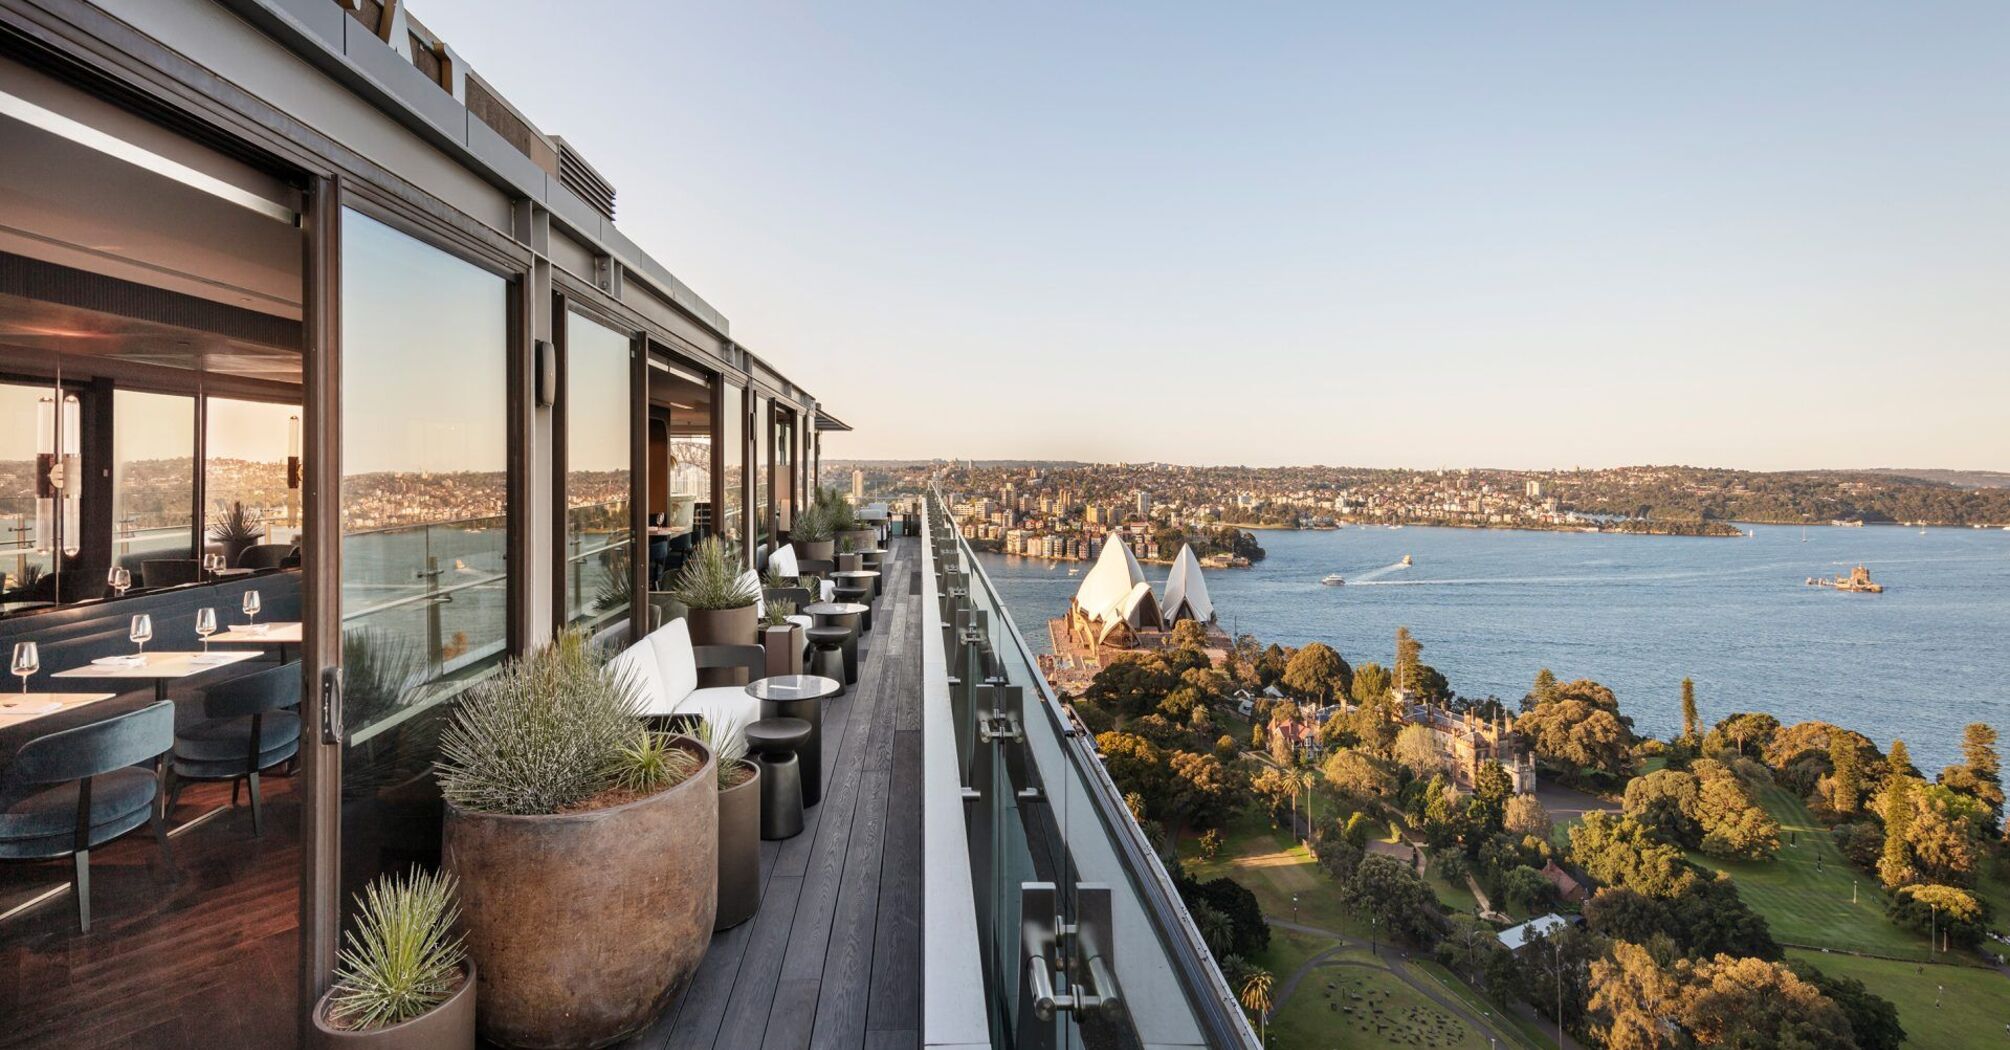 The most luxurious hotels in Sydney: 9 luxury retreats with exquisite service and stunning views